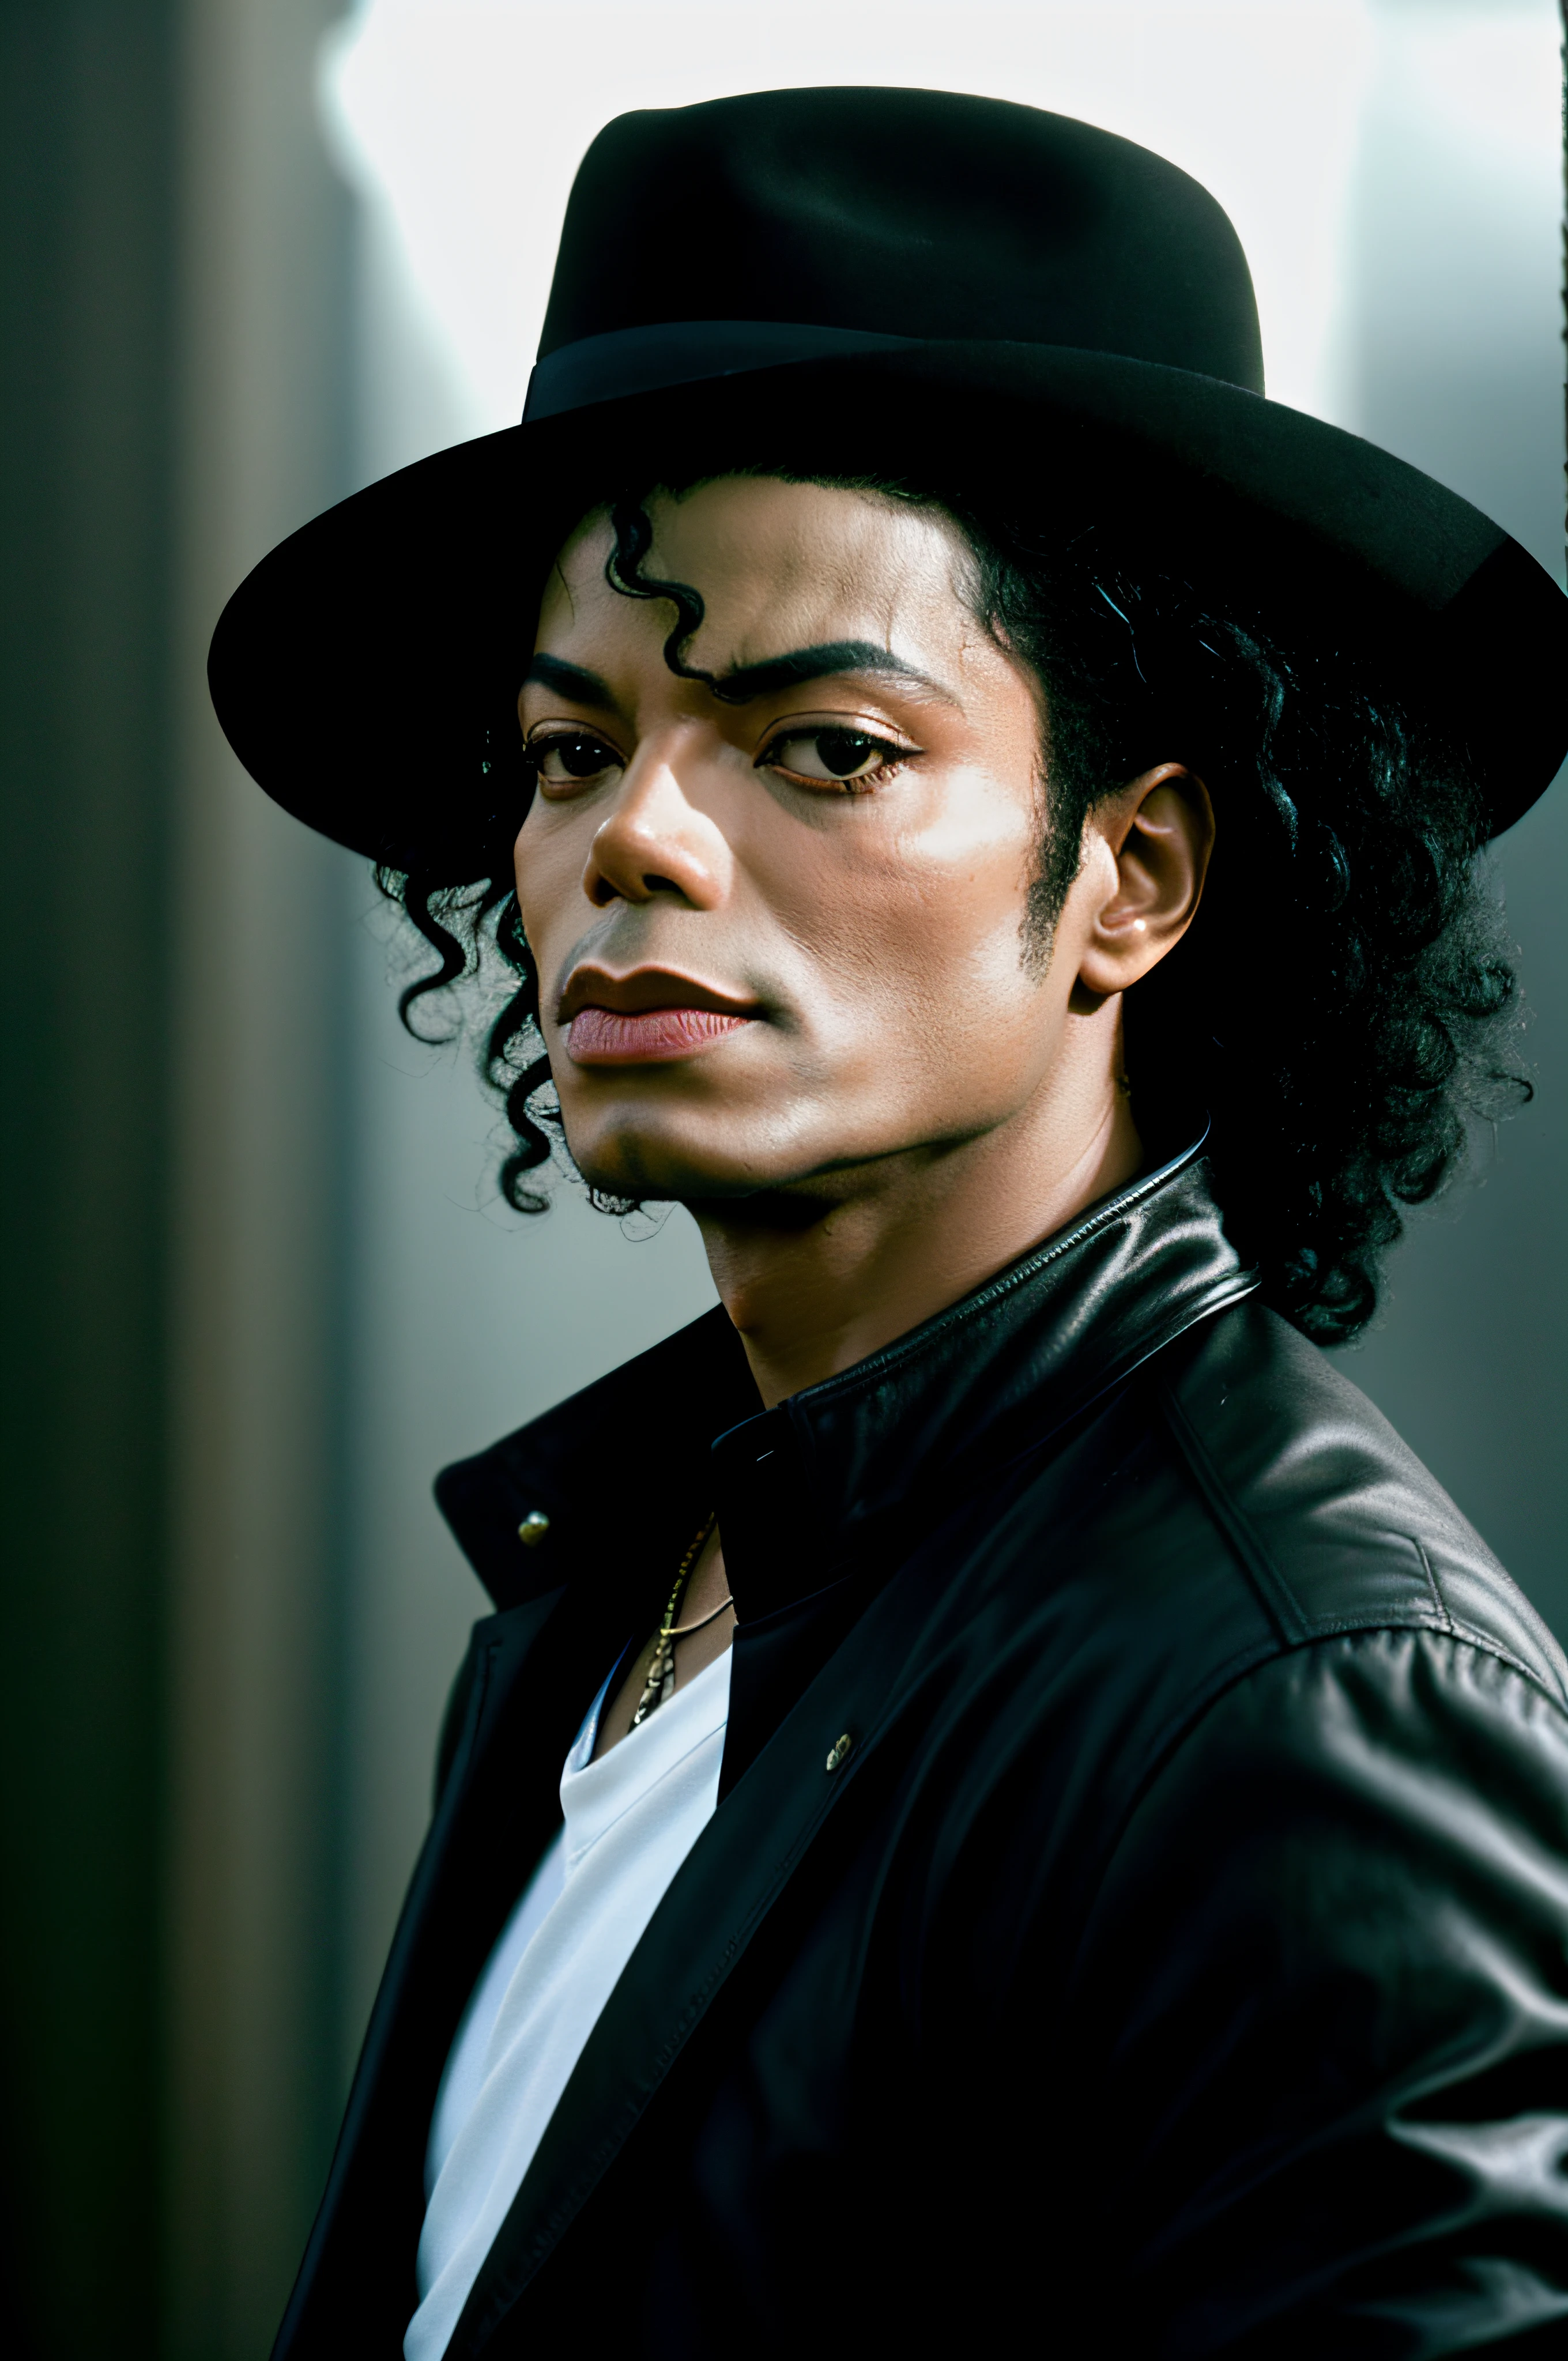 photorealistic, Michael Jackson Black Black Skin High Quality Thriller Style, first work, cinematic  composition, slow-motion,